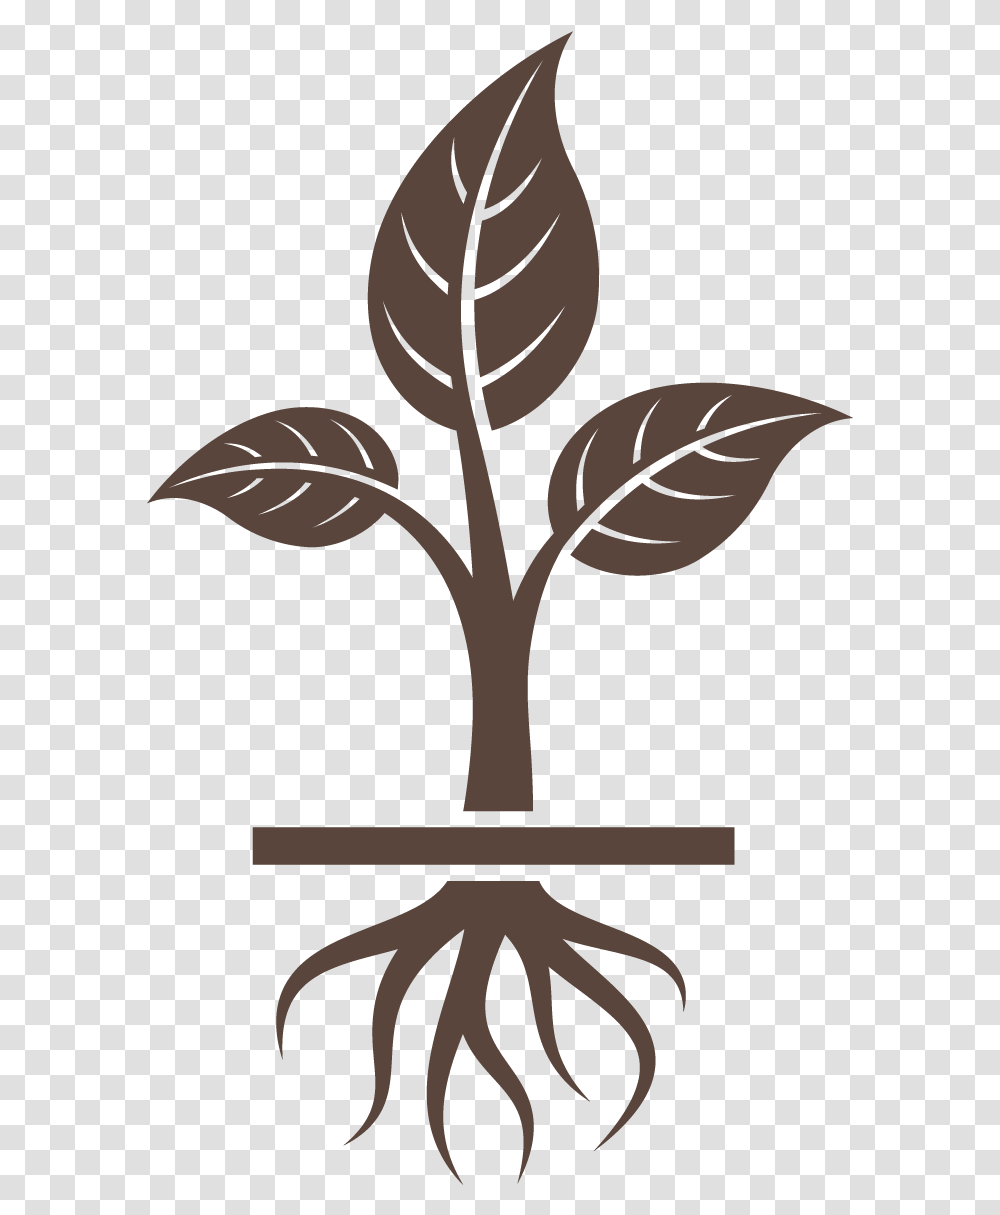 Ways To Grow Business Fast, Leaf, Plant, Tobacco, Silhouette Transparent Png